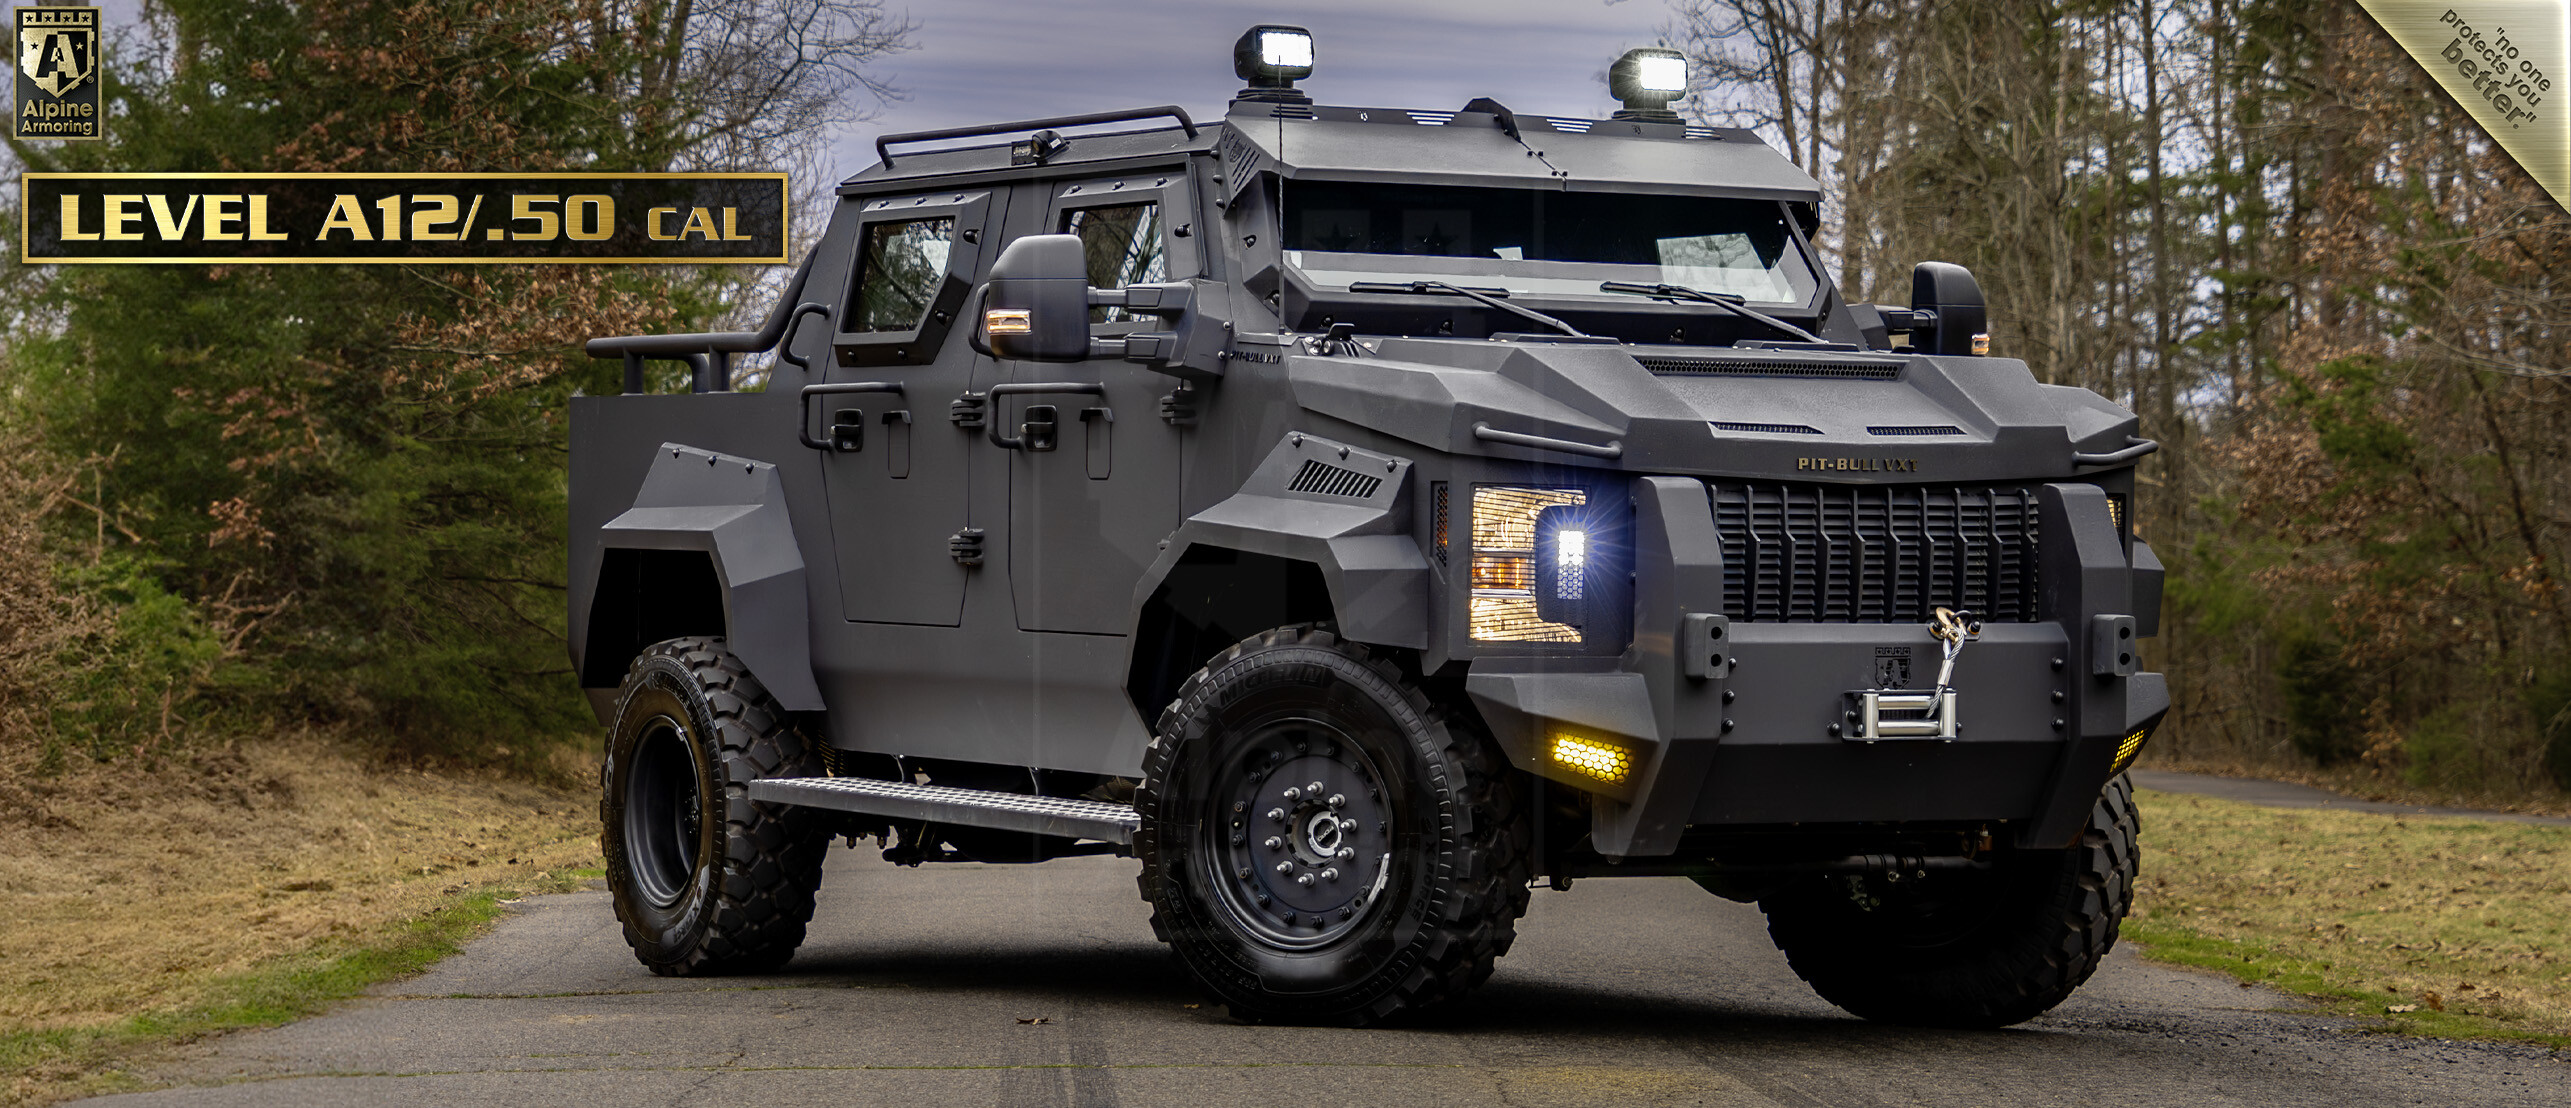 Armored SWAT Truck .50 Cal Protection - Pit-Bull® VXT | Alpine Armoring® USA